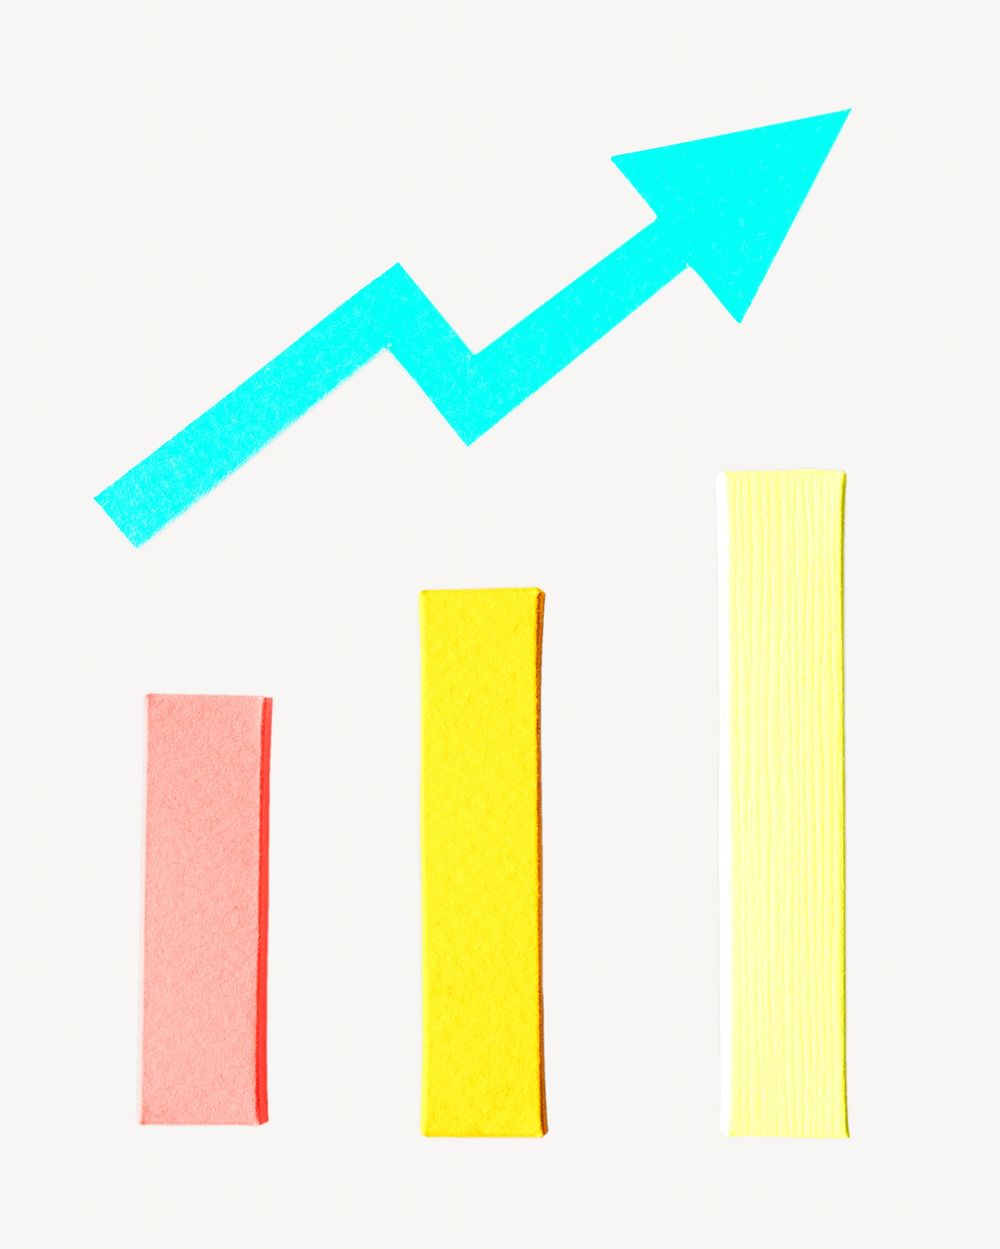 Statistics graph isolated image